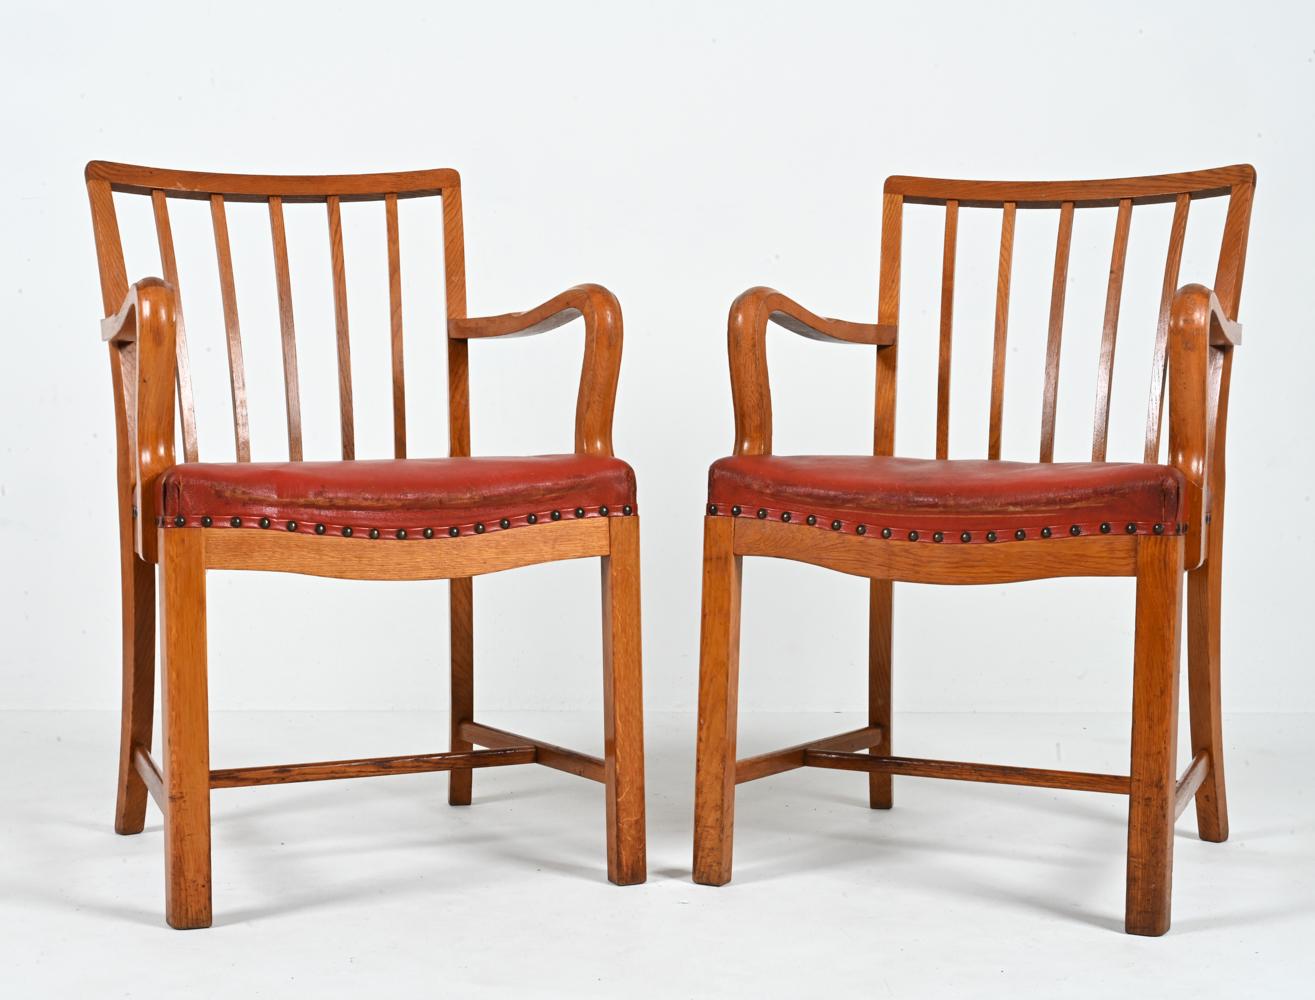 Behold an extraordinary find for the discerning collector – a rare pair of Danish Mid-Century armchairs attributed to Steen Eiler Rasmussen. Dating back to the 1940's-1950's, these chairs encapsulate the essence of timeless design with their